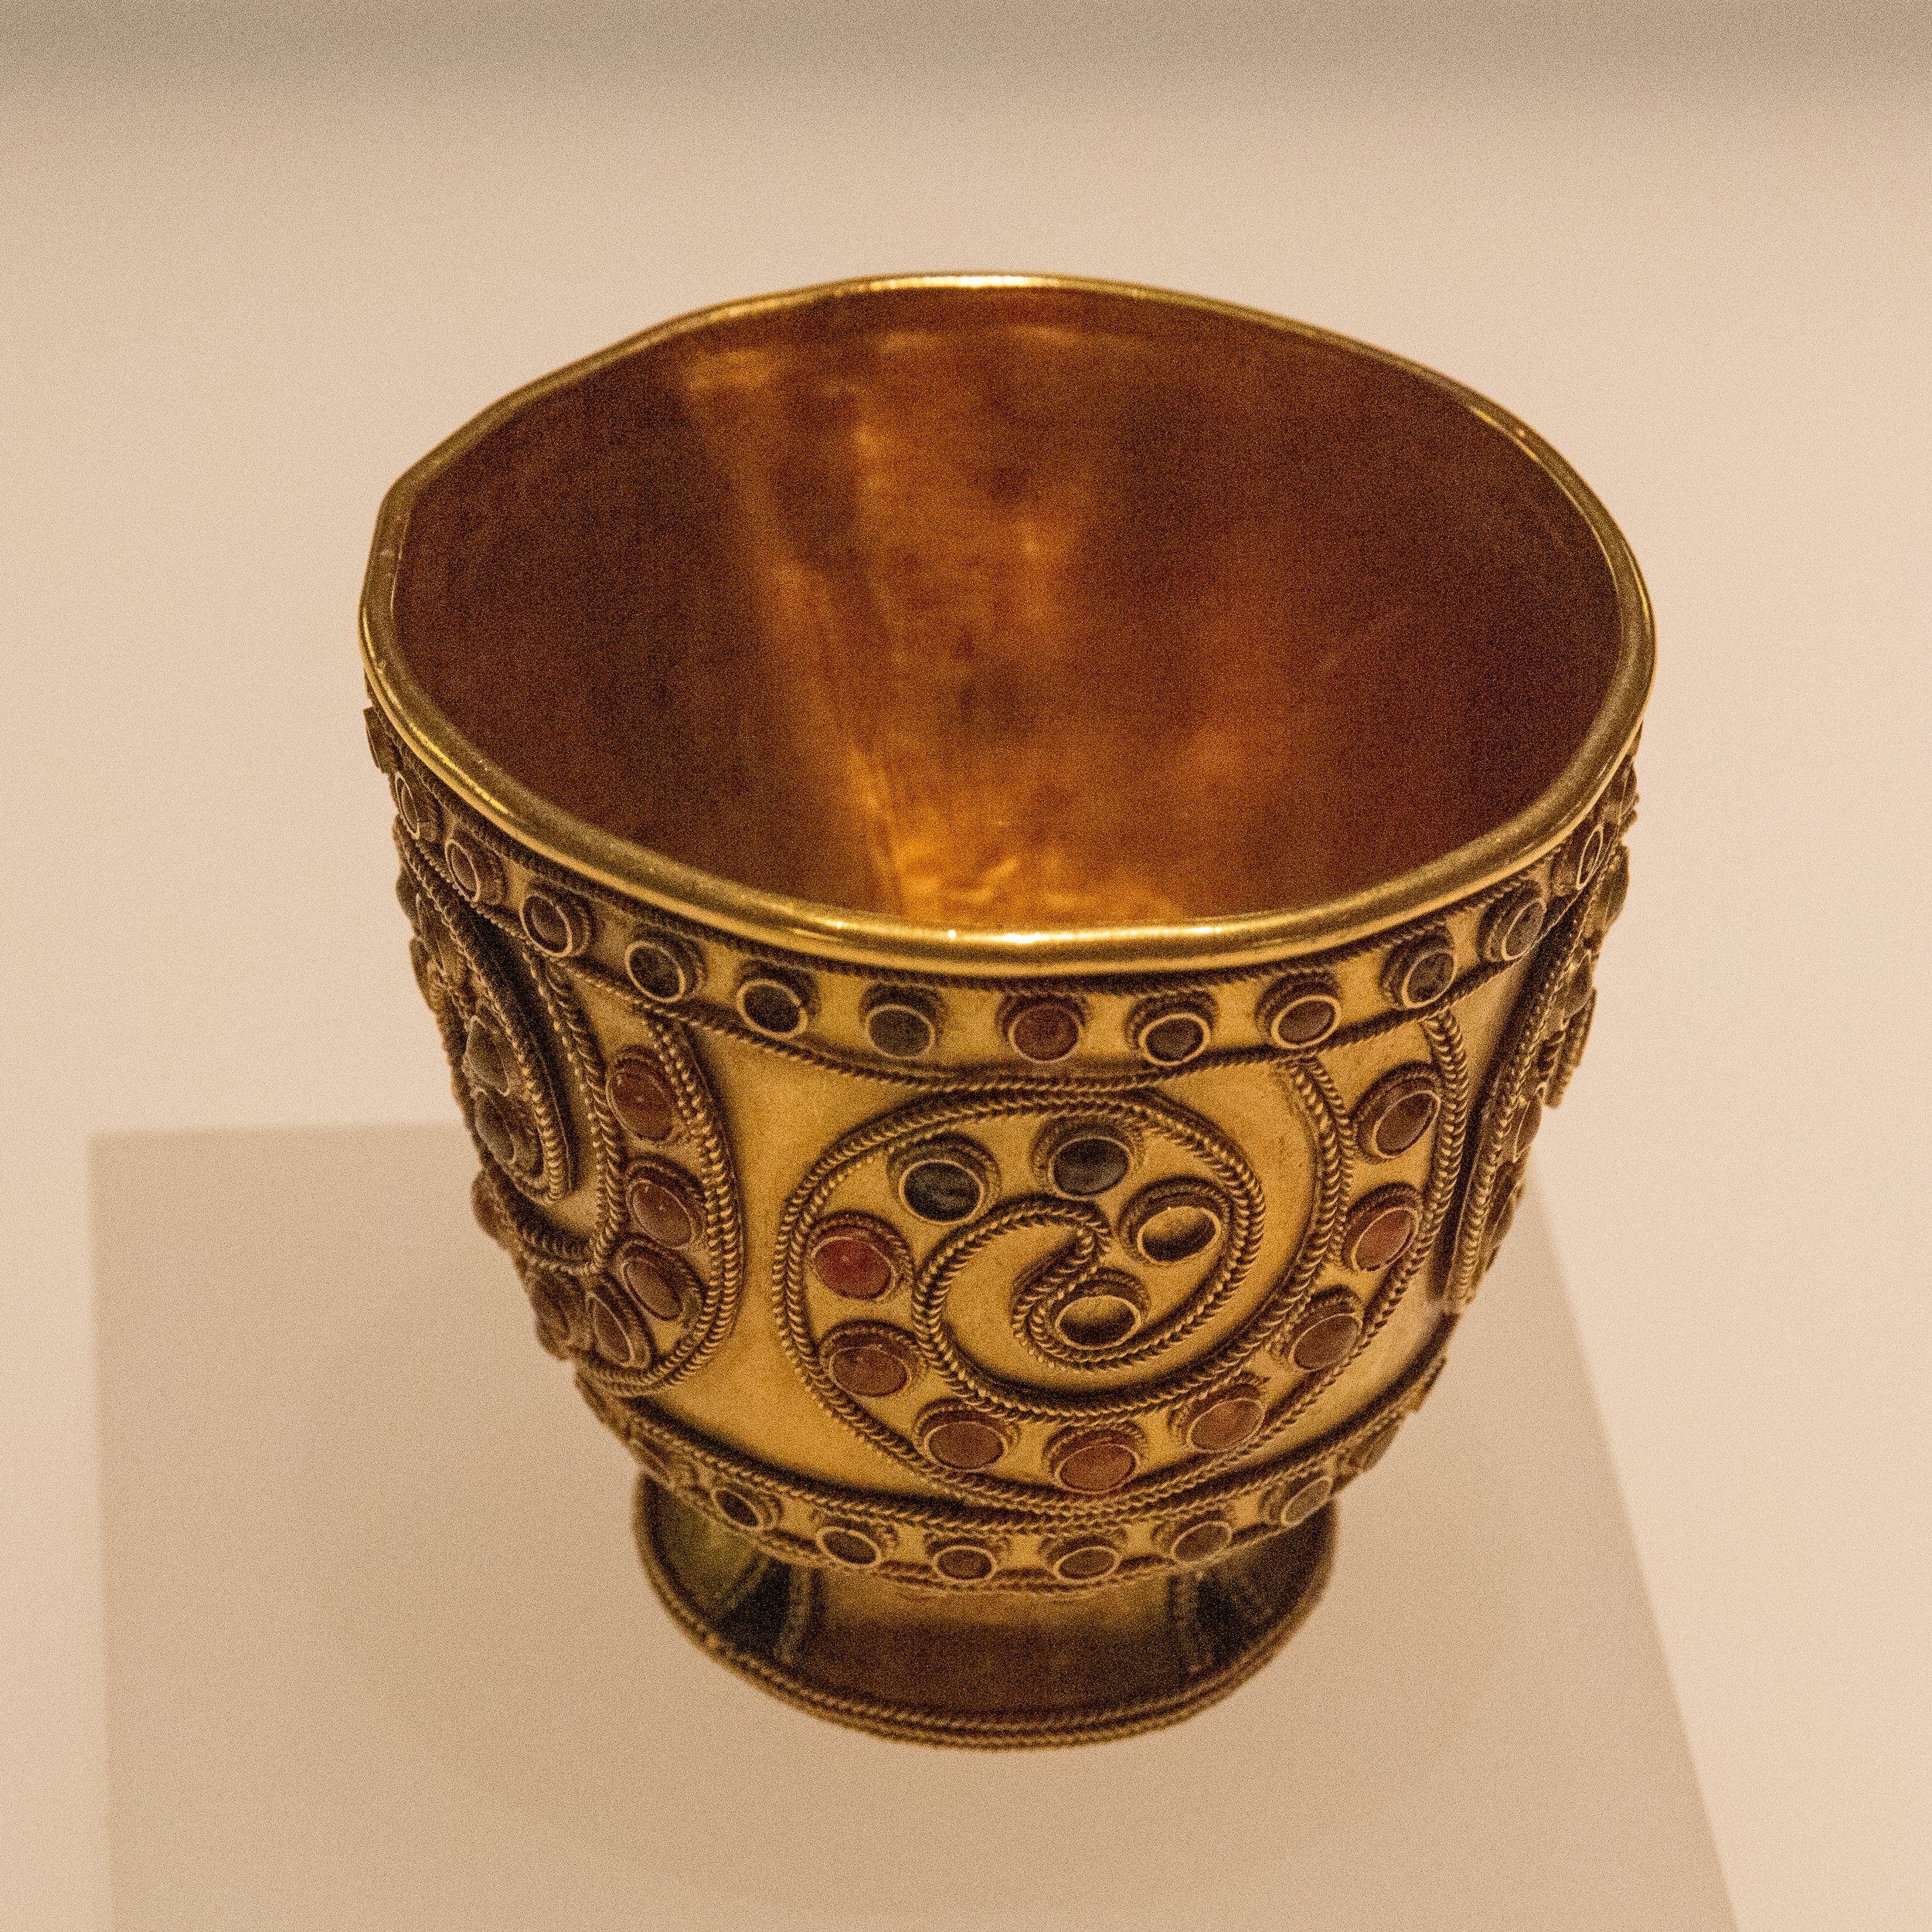 Golden goblet from about 1800 BCE, Georgian National Museum, Tbilisi